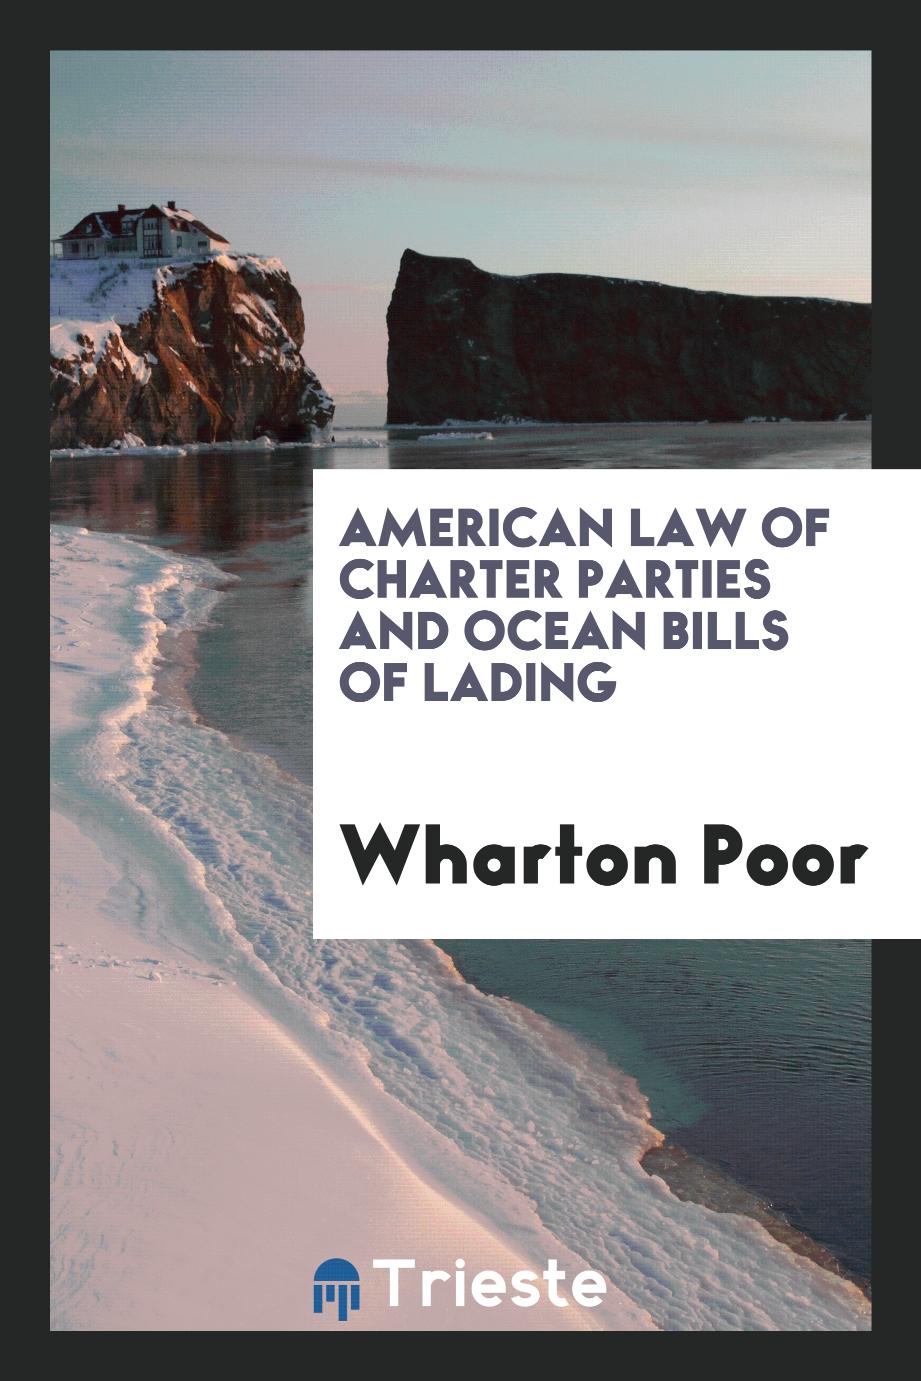 American law of charter parties and ocean bills of lading